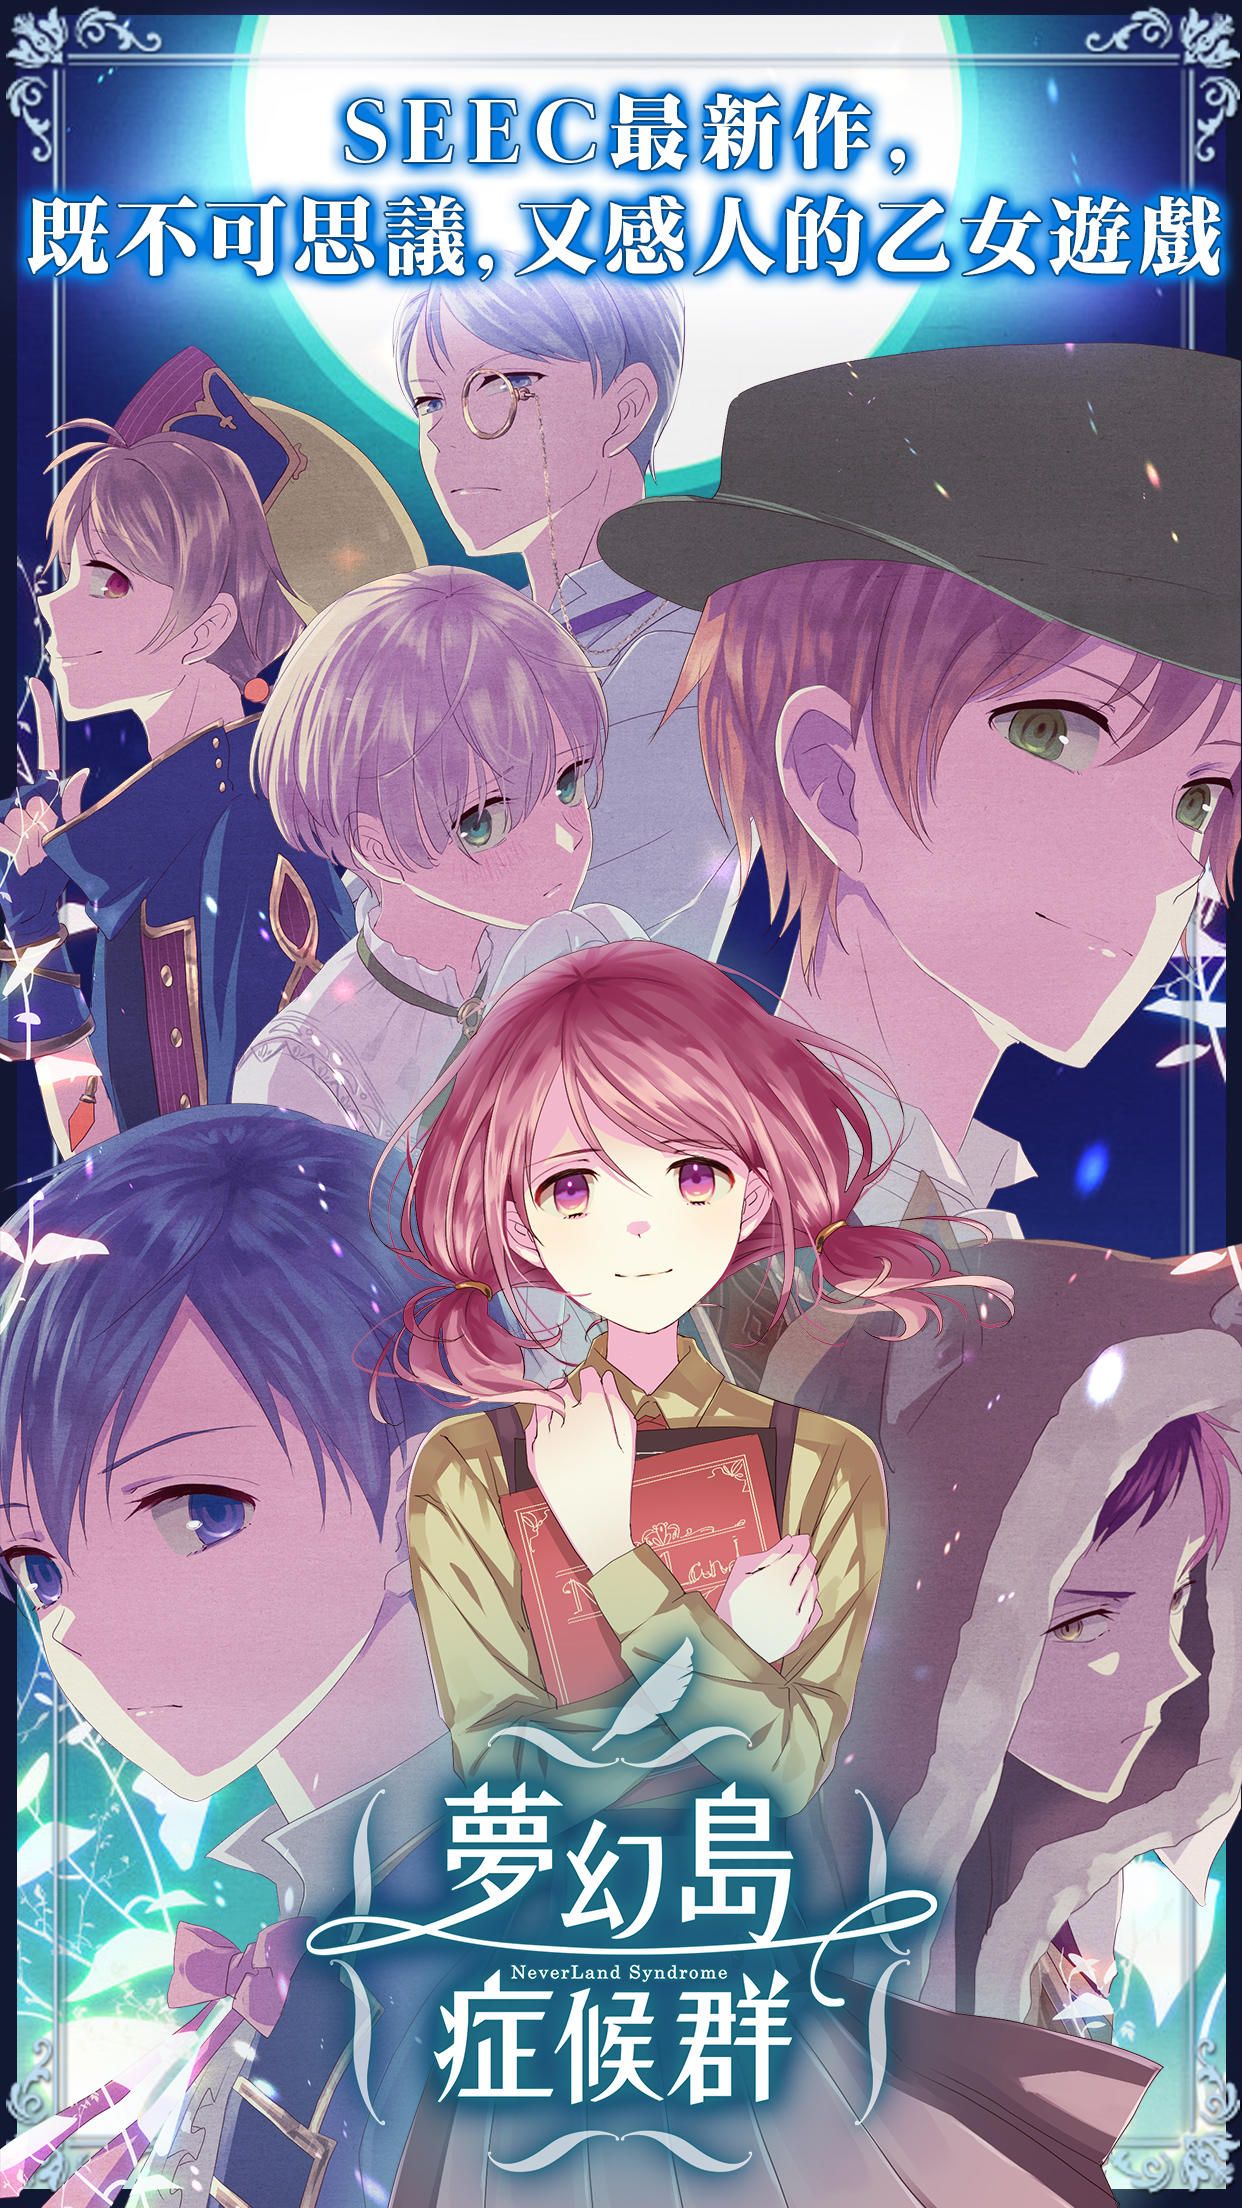 Screenshot 1 of Otome Game × Fairy Tale Neverland Syndrome 